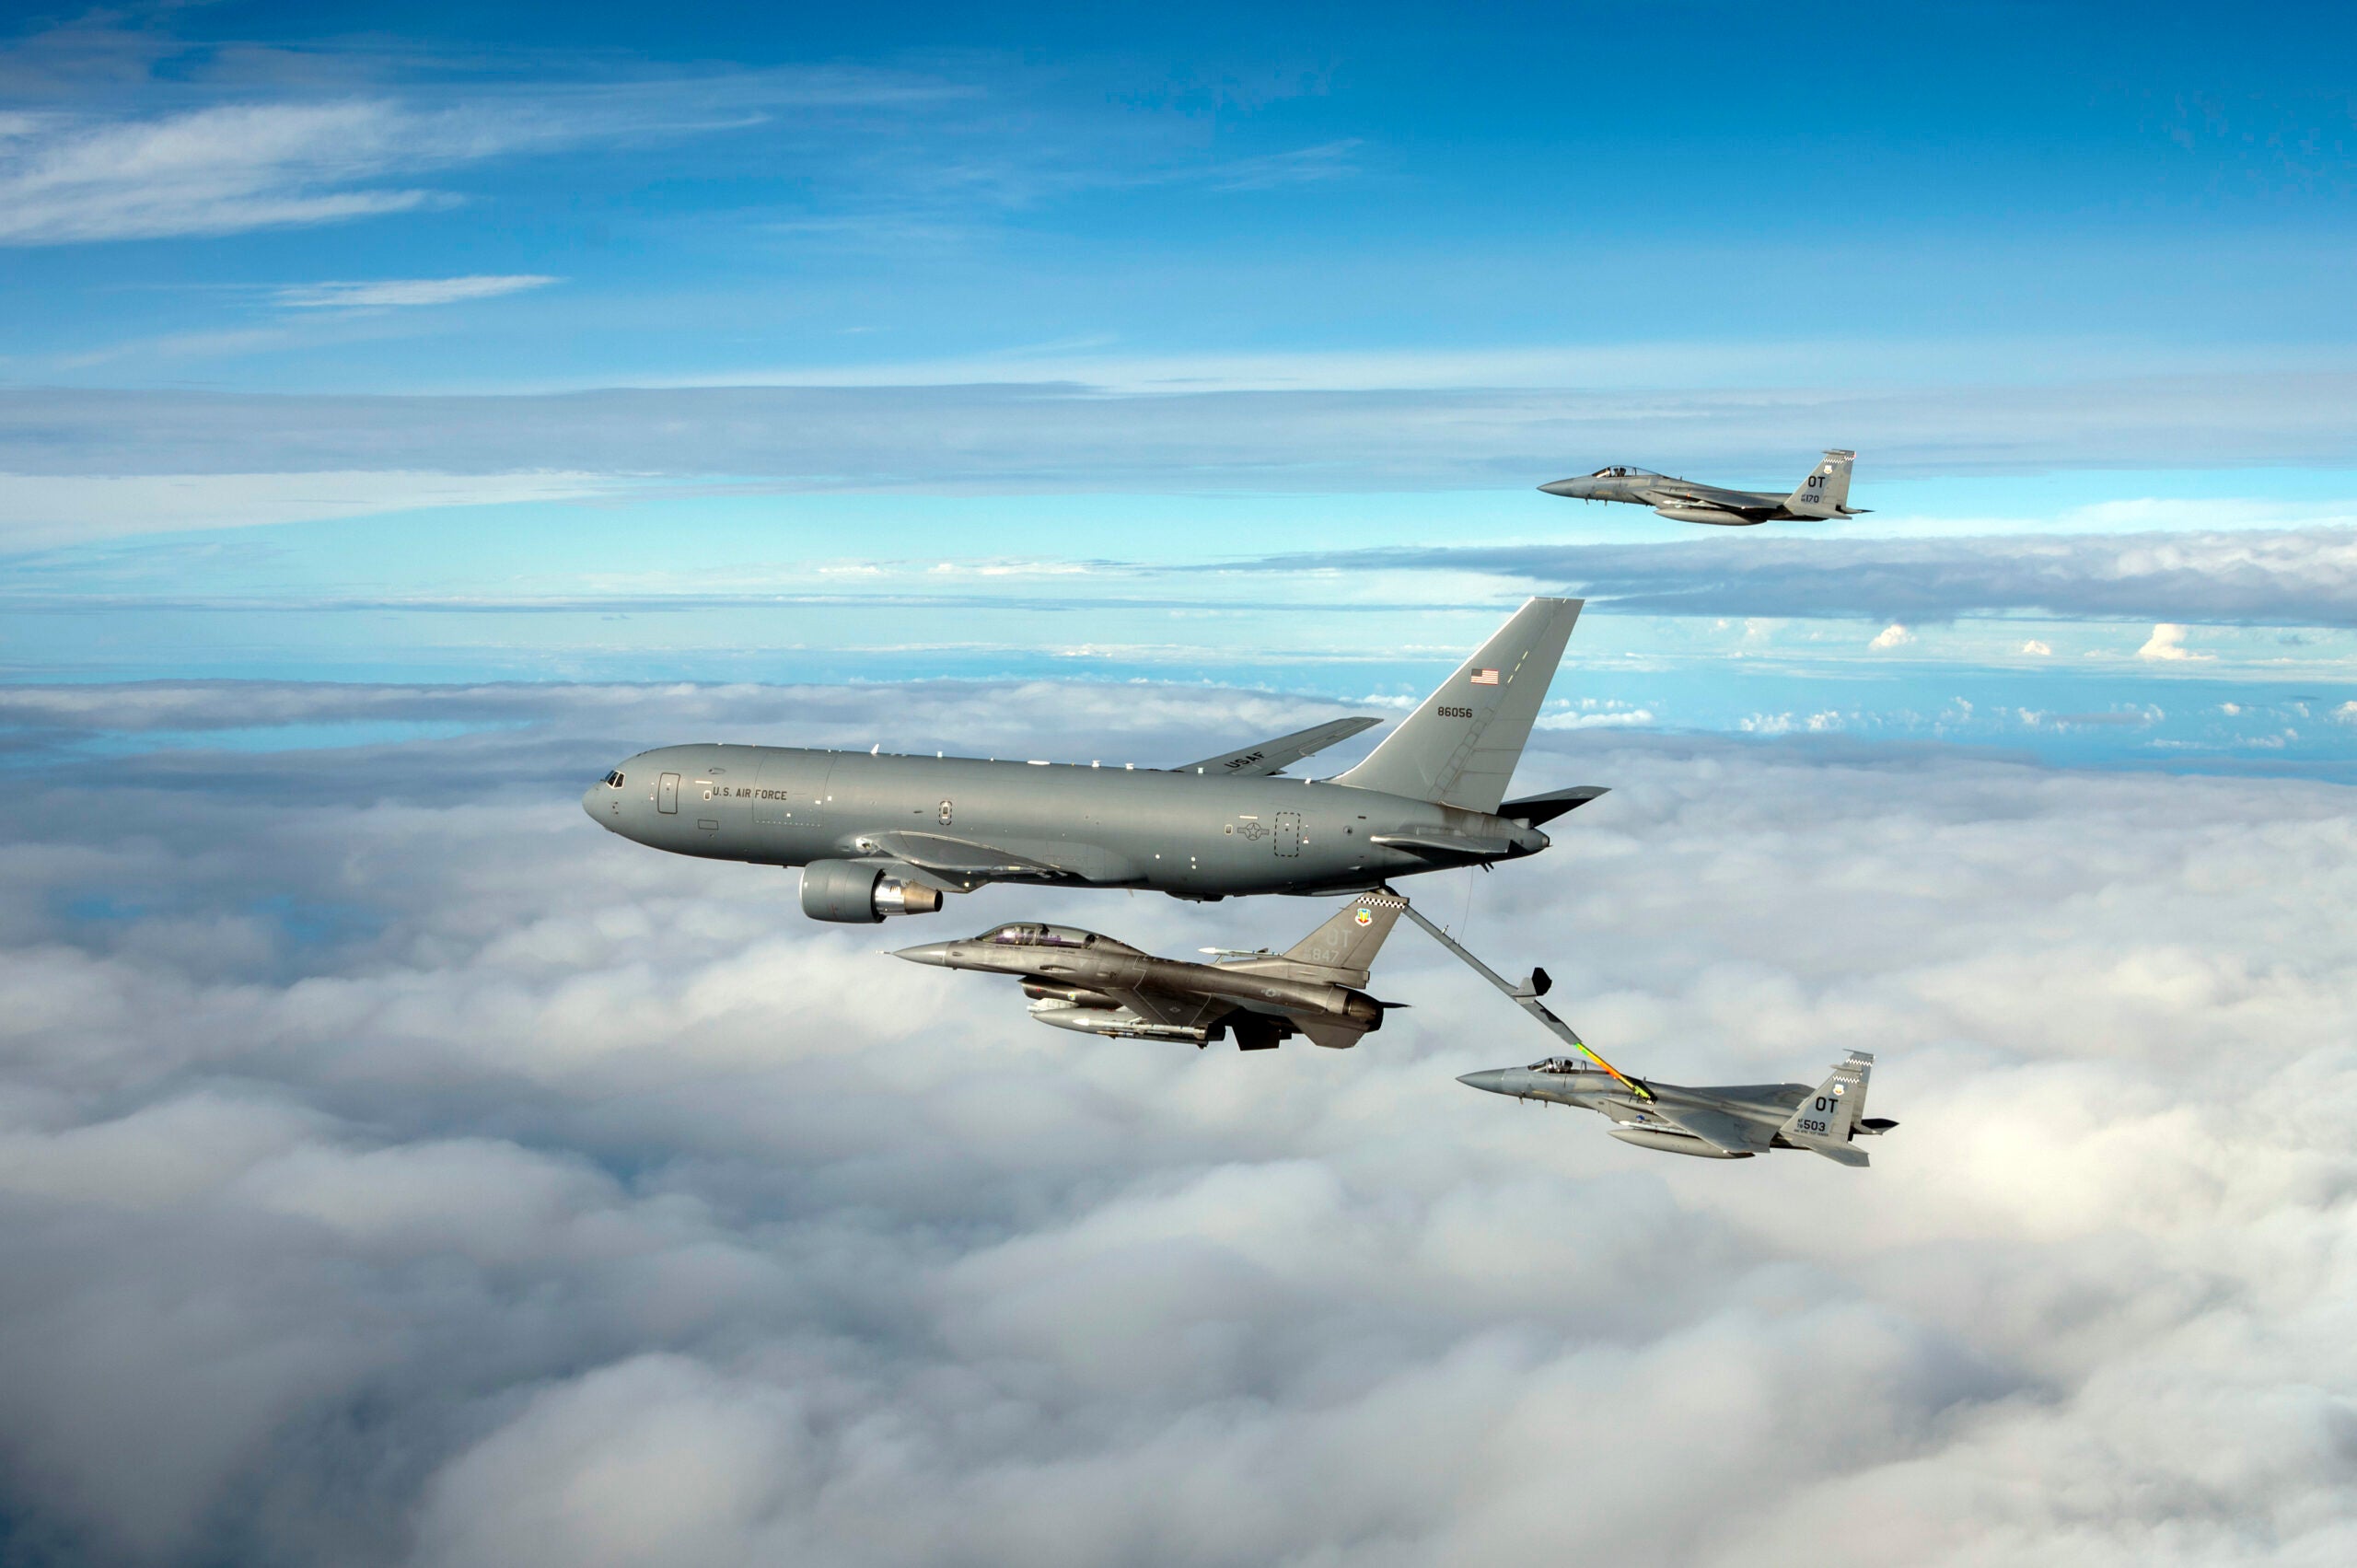 A KC-46 Pegasus assigned to the 931st Air Refueling Wing, McConnell Air Force Base, Kansas, refuels an F-15C Eagle while an F-16 Fighting Falcon and F-15C assigned to Eglin AFB, Florida, fly alongside over the Gulf of Mexico, Nov. 18, 2021. The aircraft were participating in Checkered Flag 22-1, a large-force aerial exercise held at Tyndall AFB, Florida, which fosters readiness and interoperability through the incorporation of fourth- and fifth-generation aircraft during air-to-air combat training. The 22-1 iteration of the exercise was held Nov. 8-19, 2021. (U.S. Air Force photo by Staff Sgt. Betty R. Chevalier)